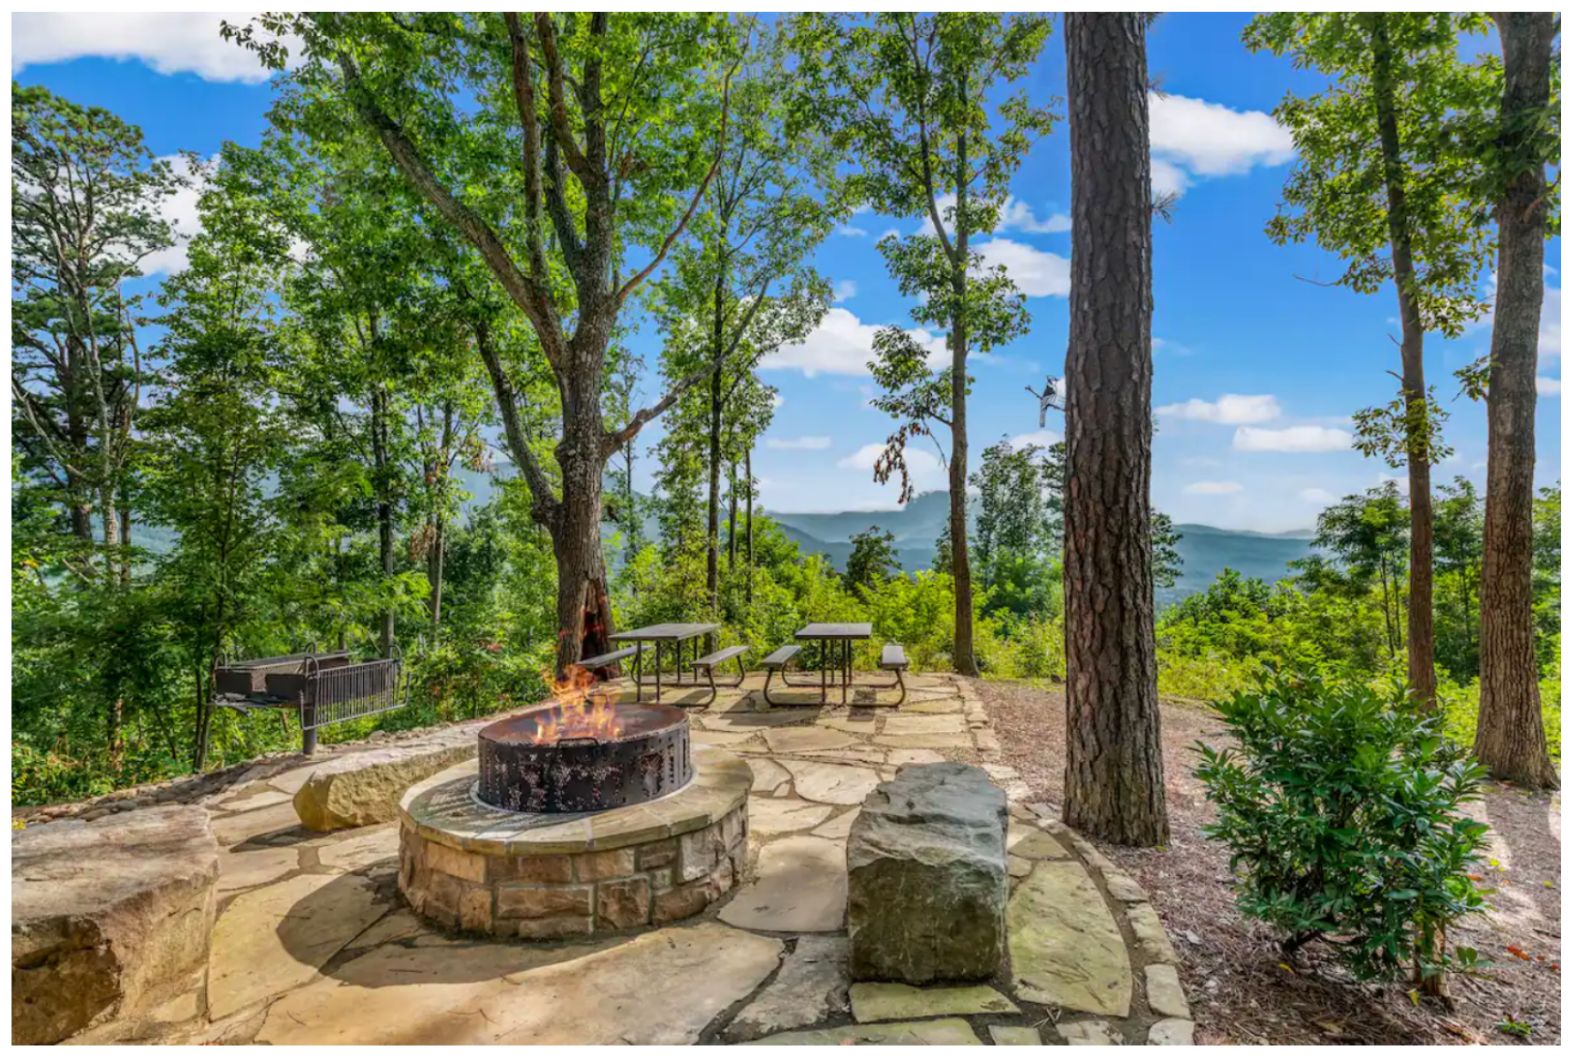 authentic photos are key to guest reviews in cabin rentals like this outdoor fireplace shot